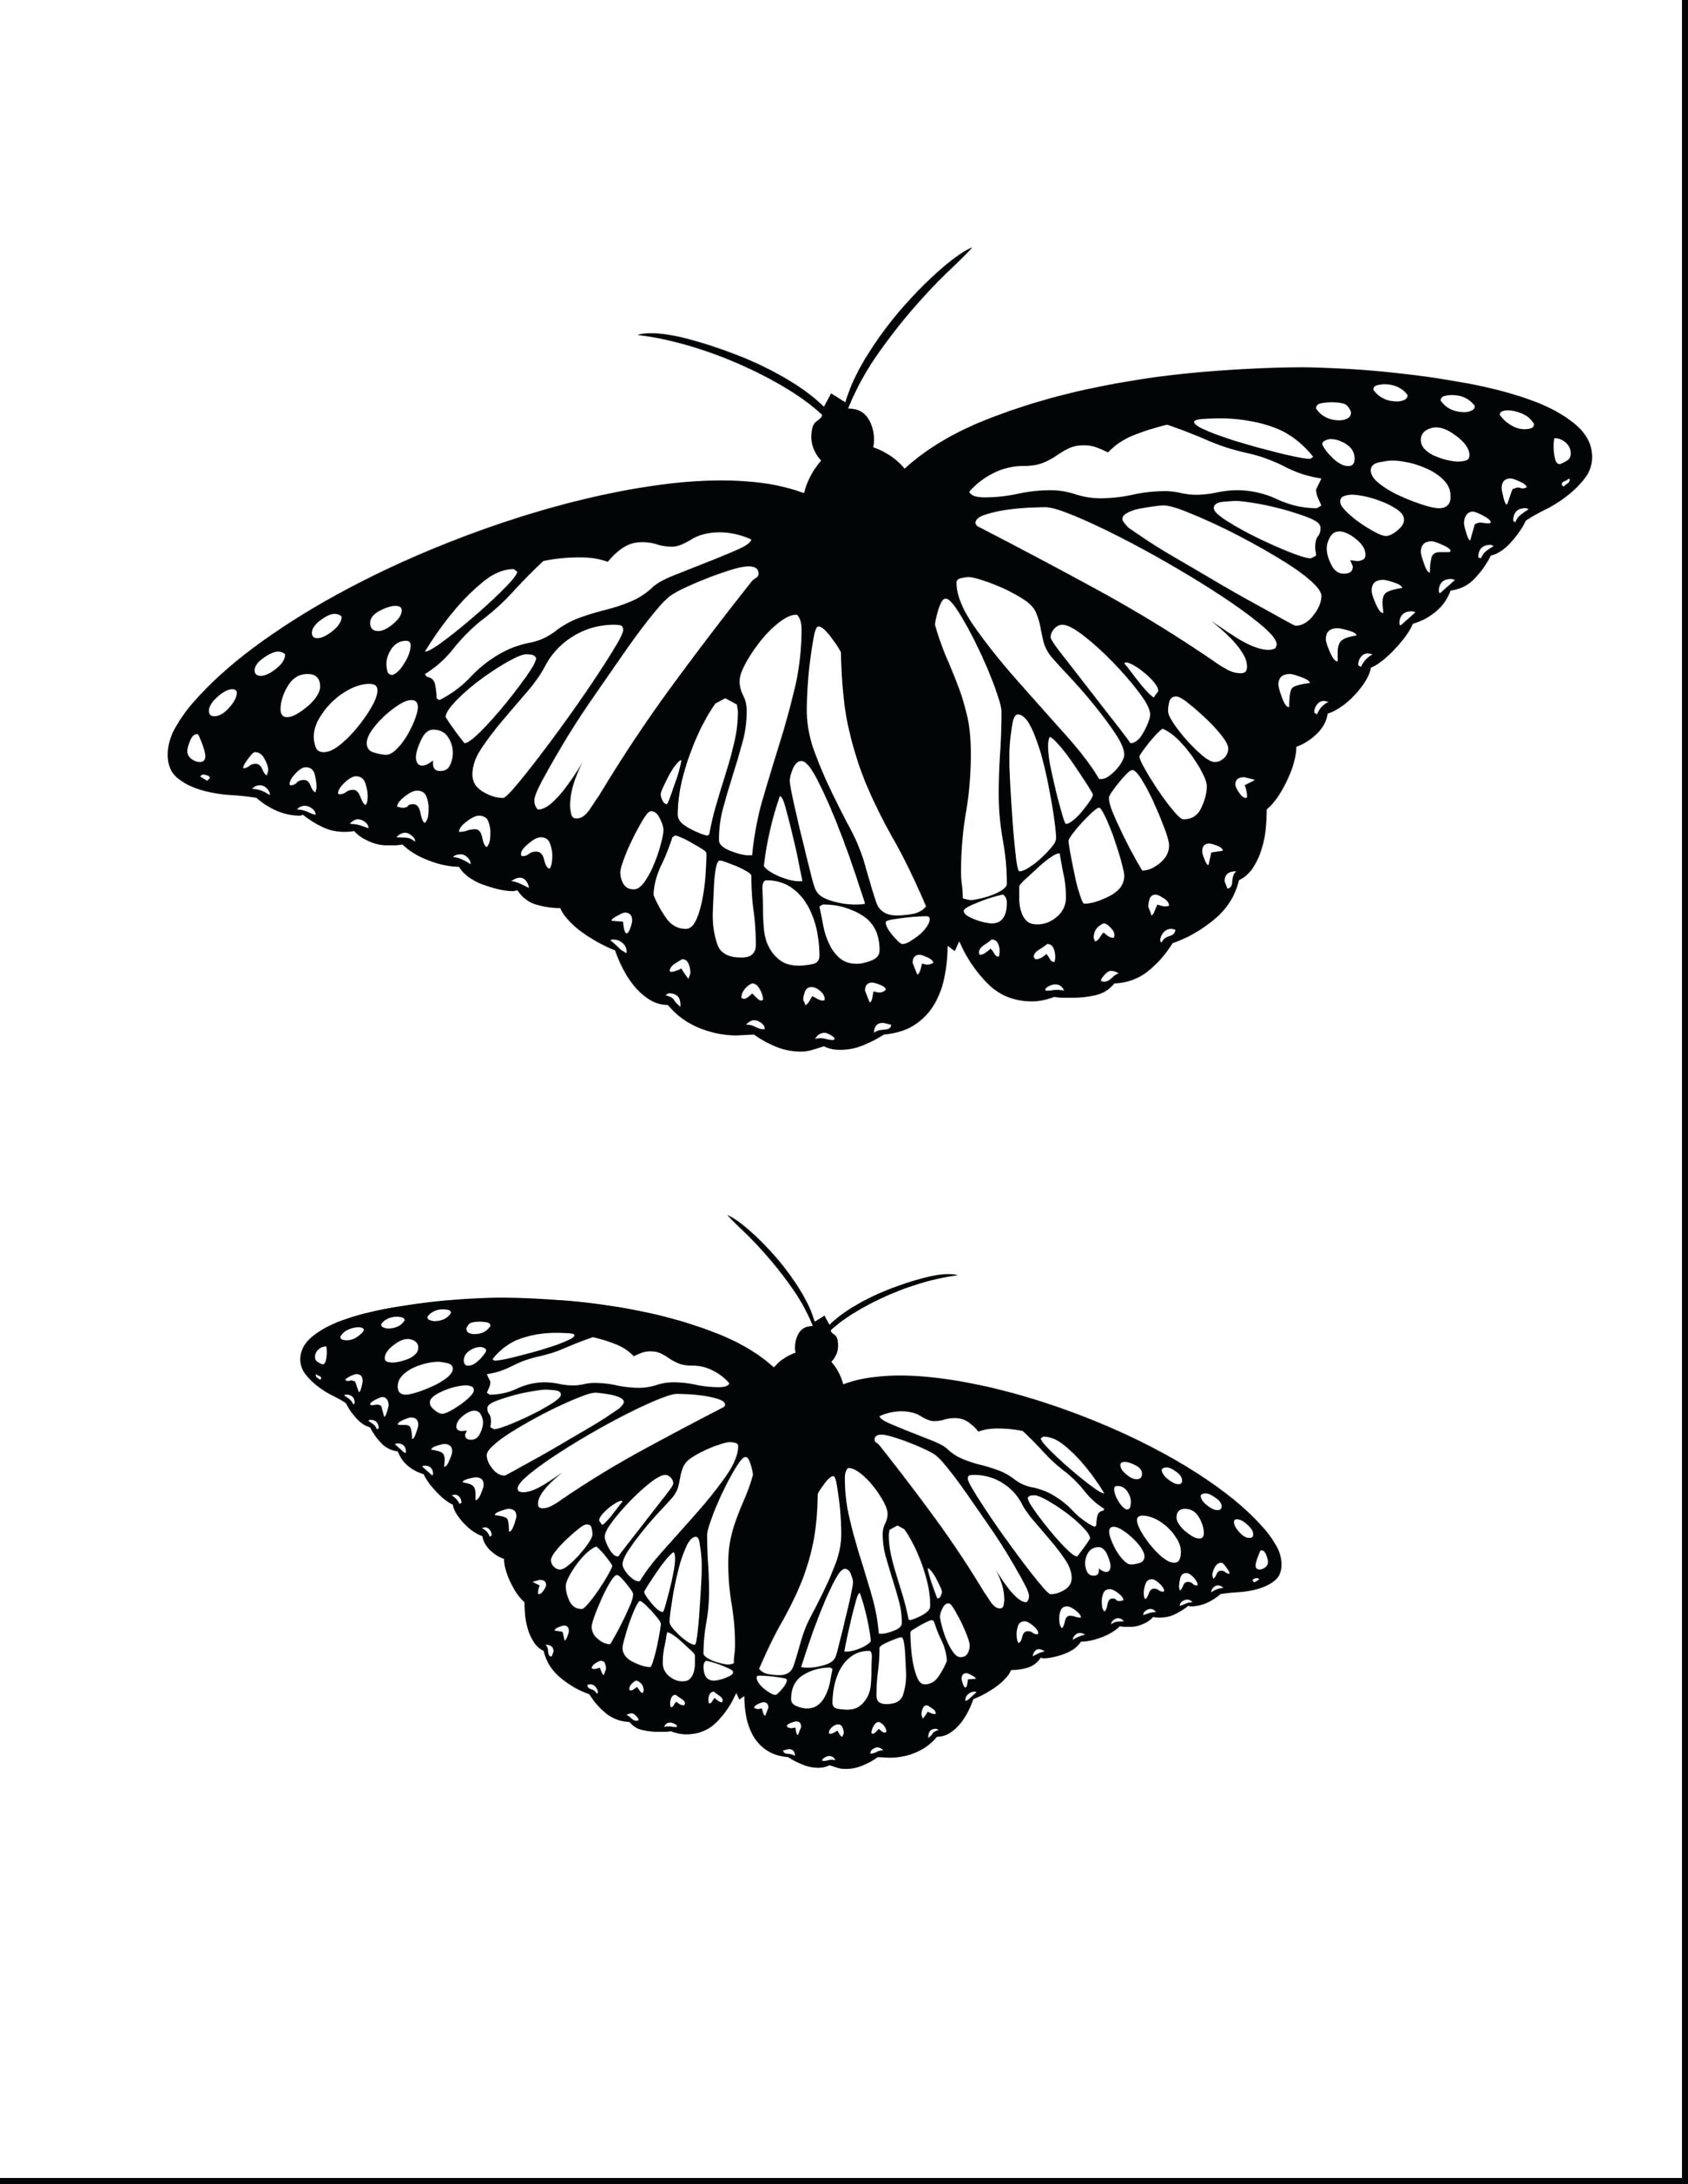 Monarch Butterfly Coloring Page Monarch Butterfly Coloring Page Coloring Pages For Children